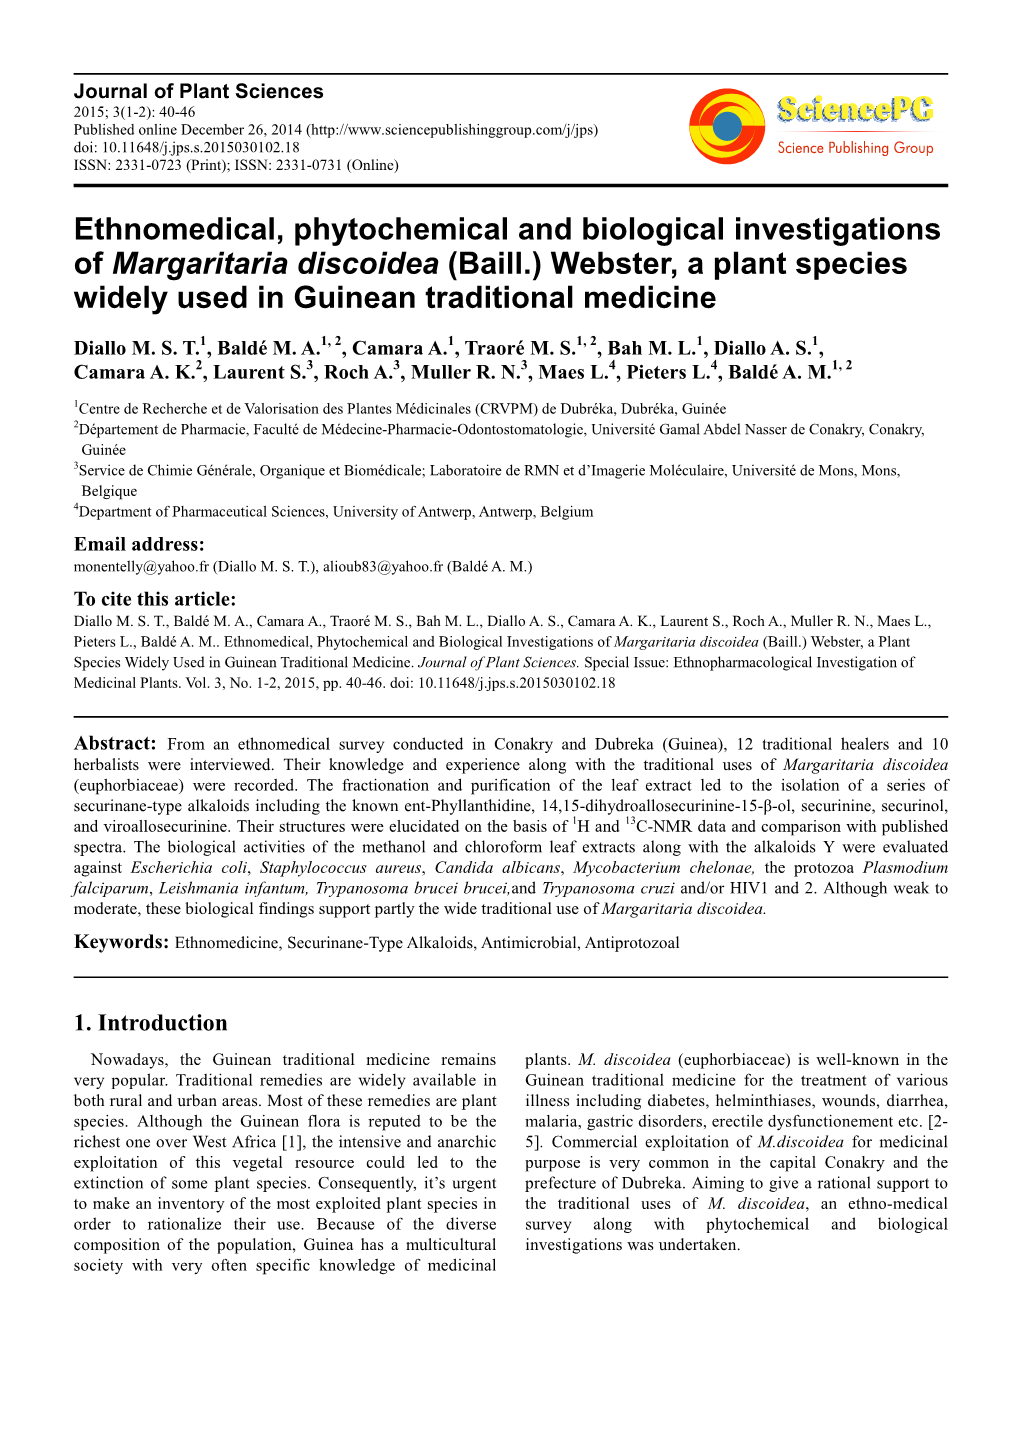 Ethnomedical, Phytochemical and Biological Investigations of Margaritaria Discoidea (Baill.) Webster, a Plant Species Widely Used in Guinean Traditional Medicine